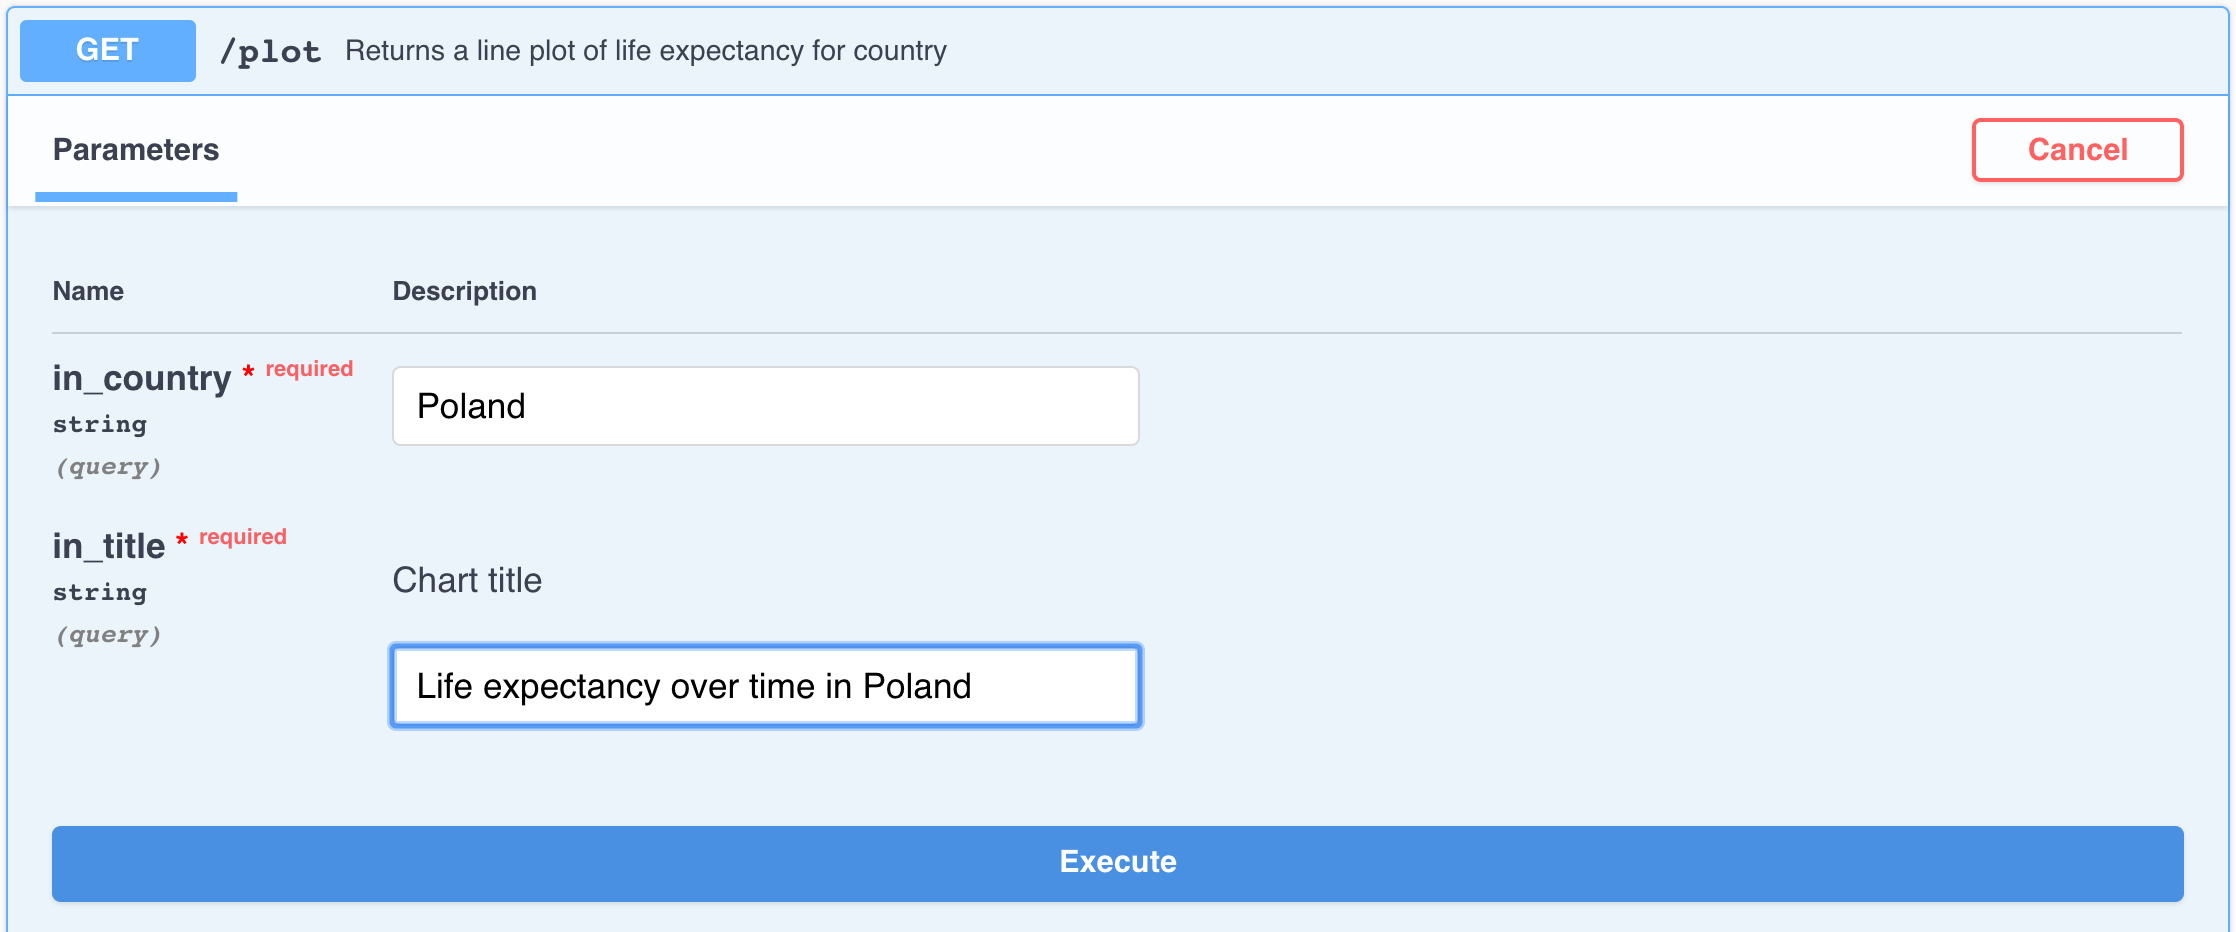 Image 7 - Testing out the /plot endpoint for life expectancy in Poland